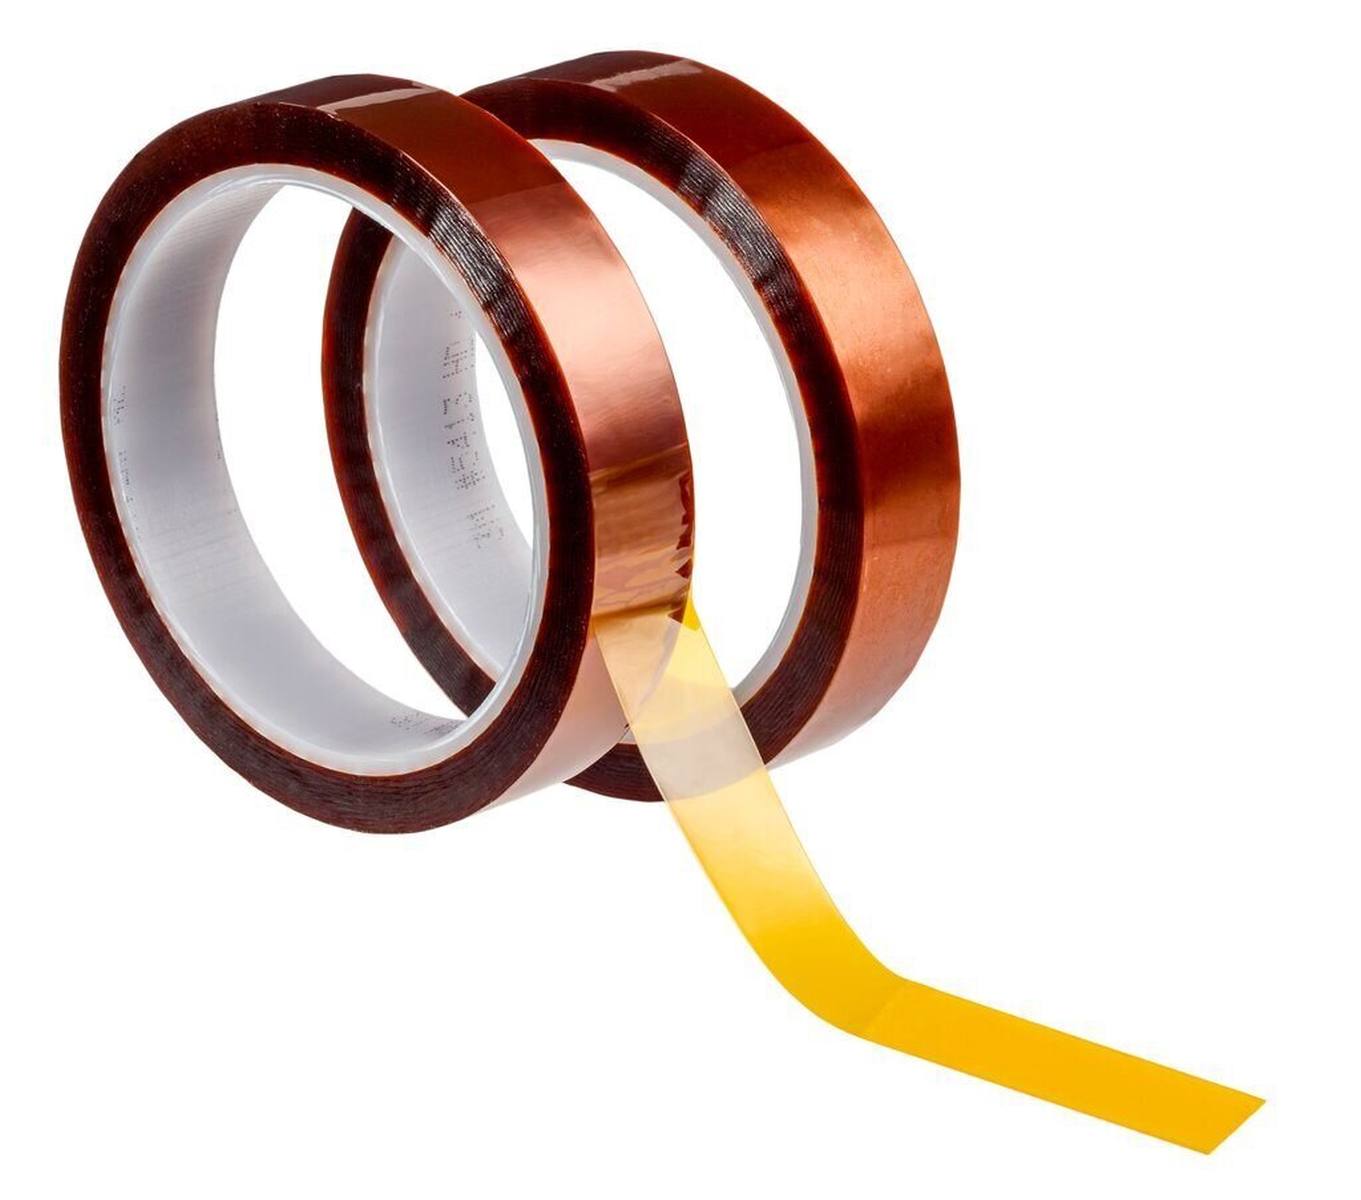 3M High Temperature Polyimide Adhesive Tape 5413, ruskea, 19,1 mm x 33 m, 68,58 µm.